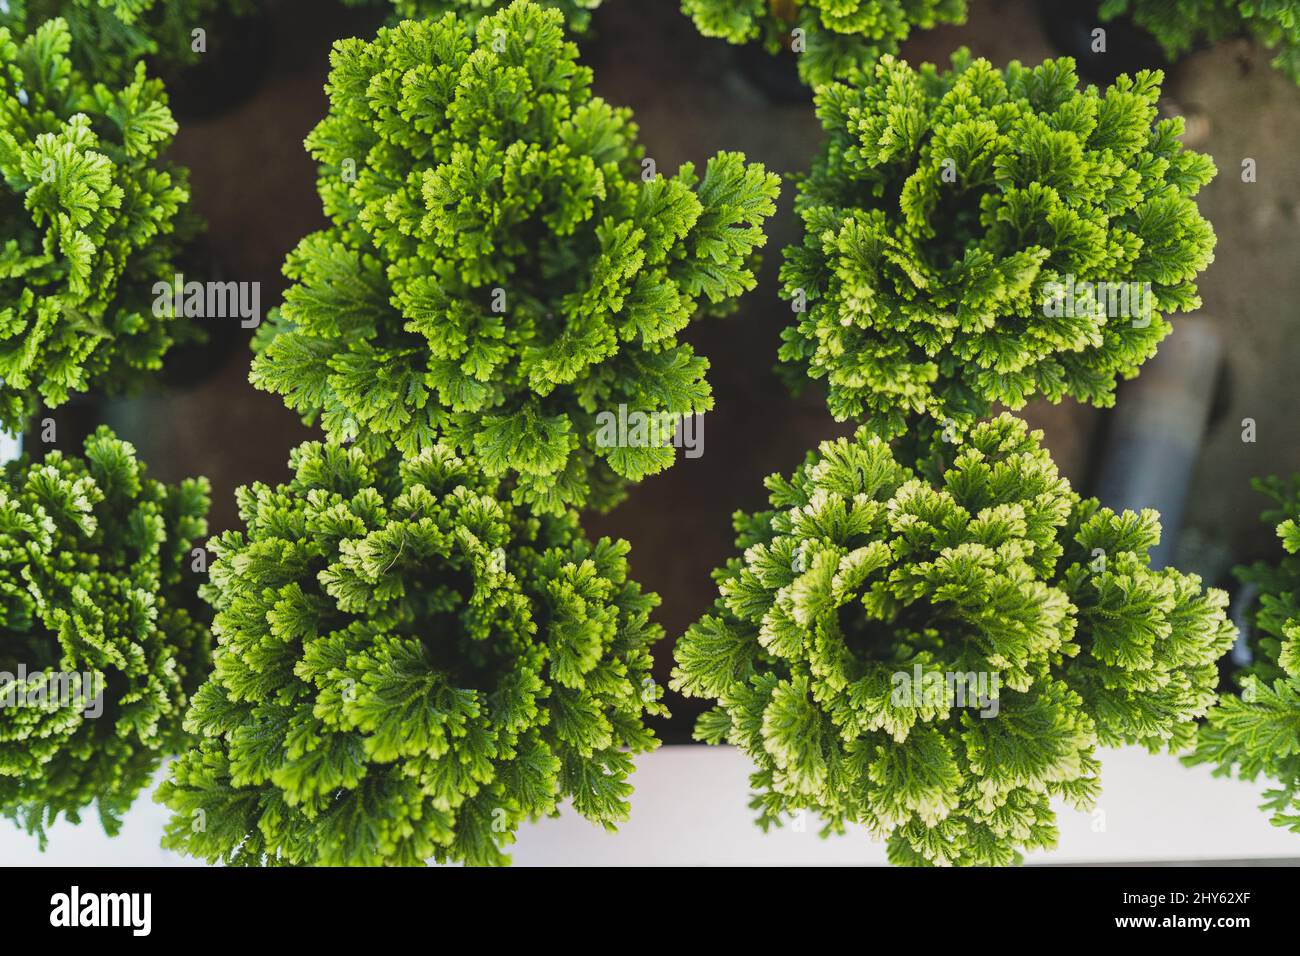 Top view of the tropical growing green selaginella plants in the flowerpots Stock Photo